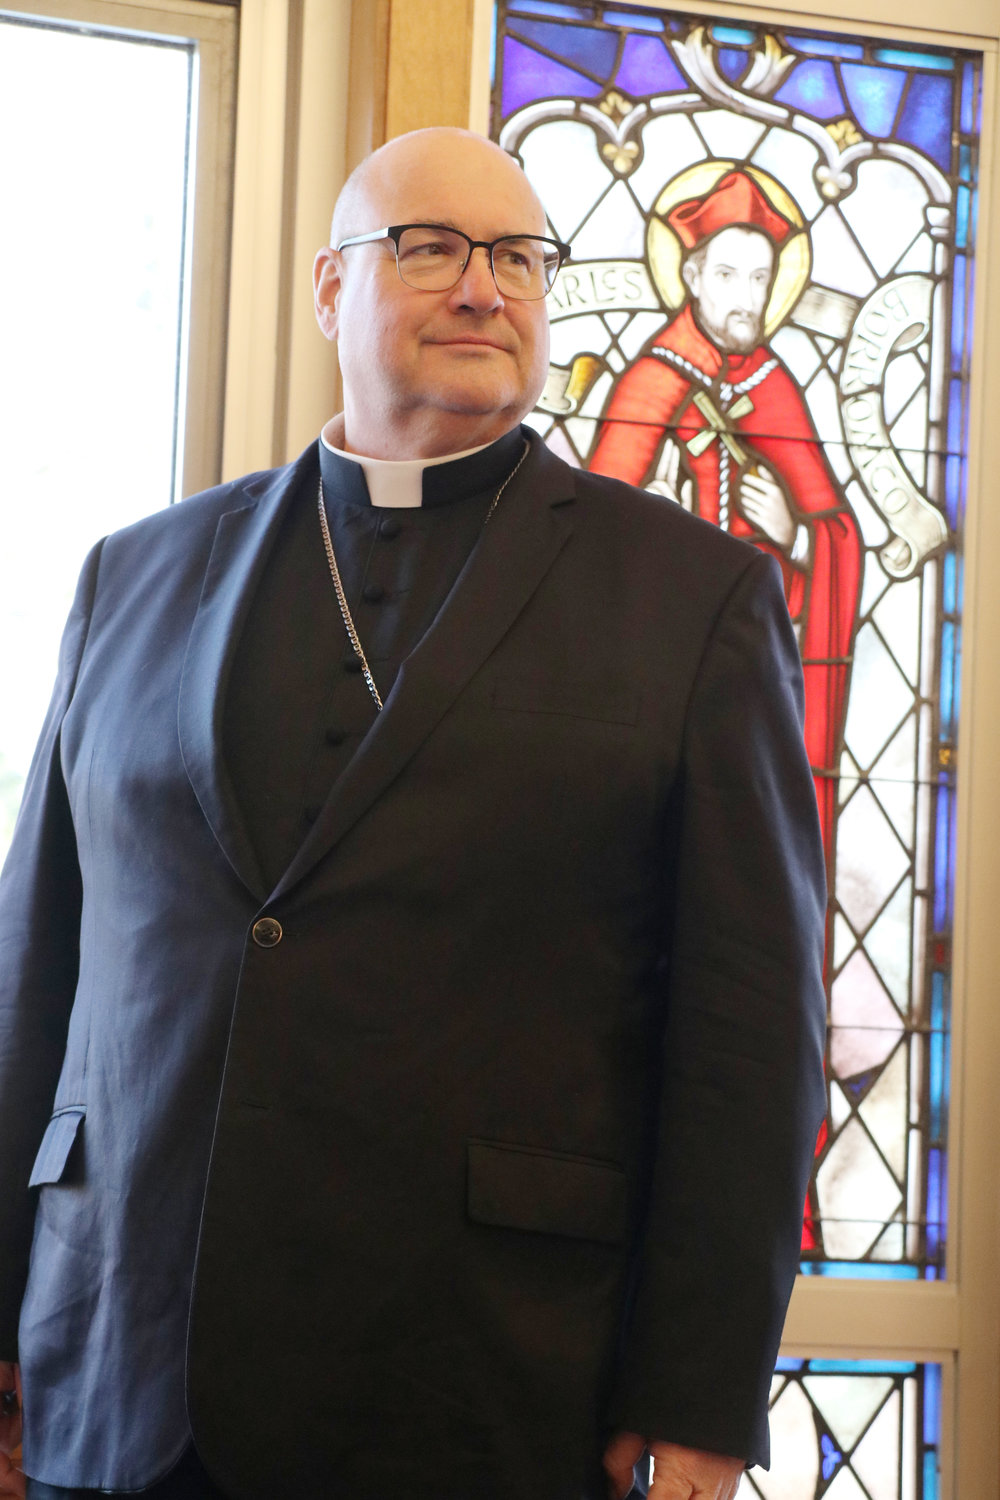 Pope Francis has appointed Most Reverend Richard G. Henning, S.T.D., as Coadjutor Bishop of Providence. The Diocese of Providence held a press conference November 23 with Bishop Tobin and Bishop Henning at the Cathedral of Saints Peter and Paul.